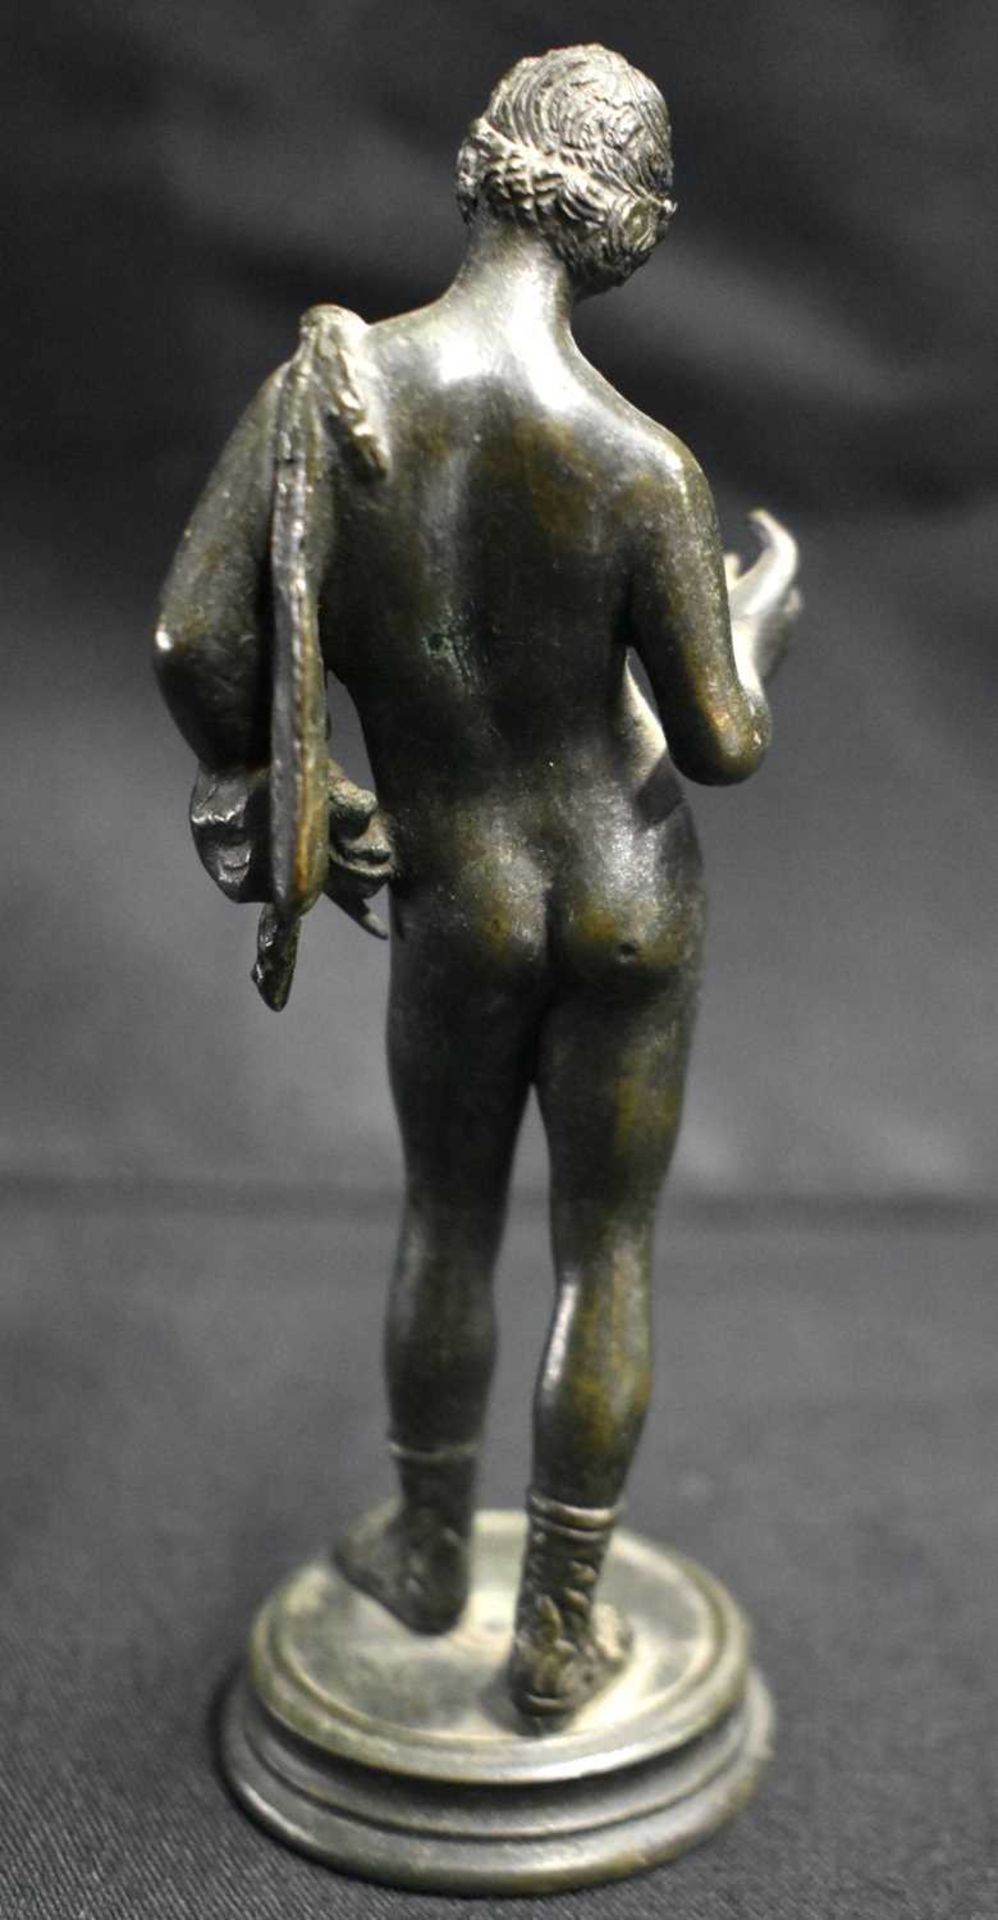 A 19TH CENTURY ITALIAN GRAND TOUR BRONZE FIGURE OF NARCISSUS After the Antiquity. 13 cm high. - Image 4 of 6